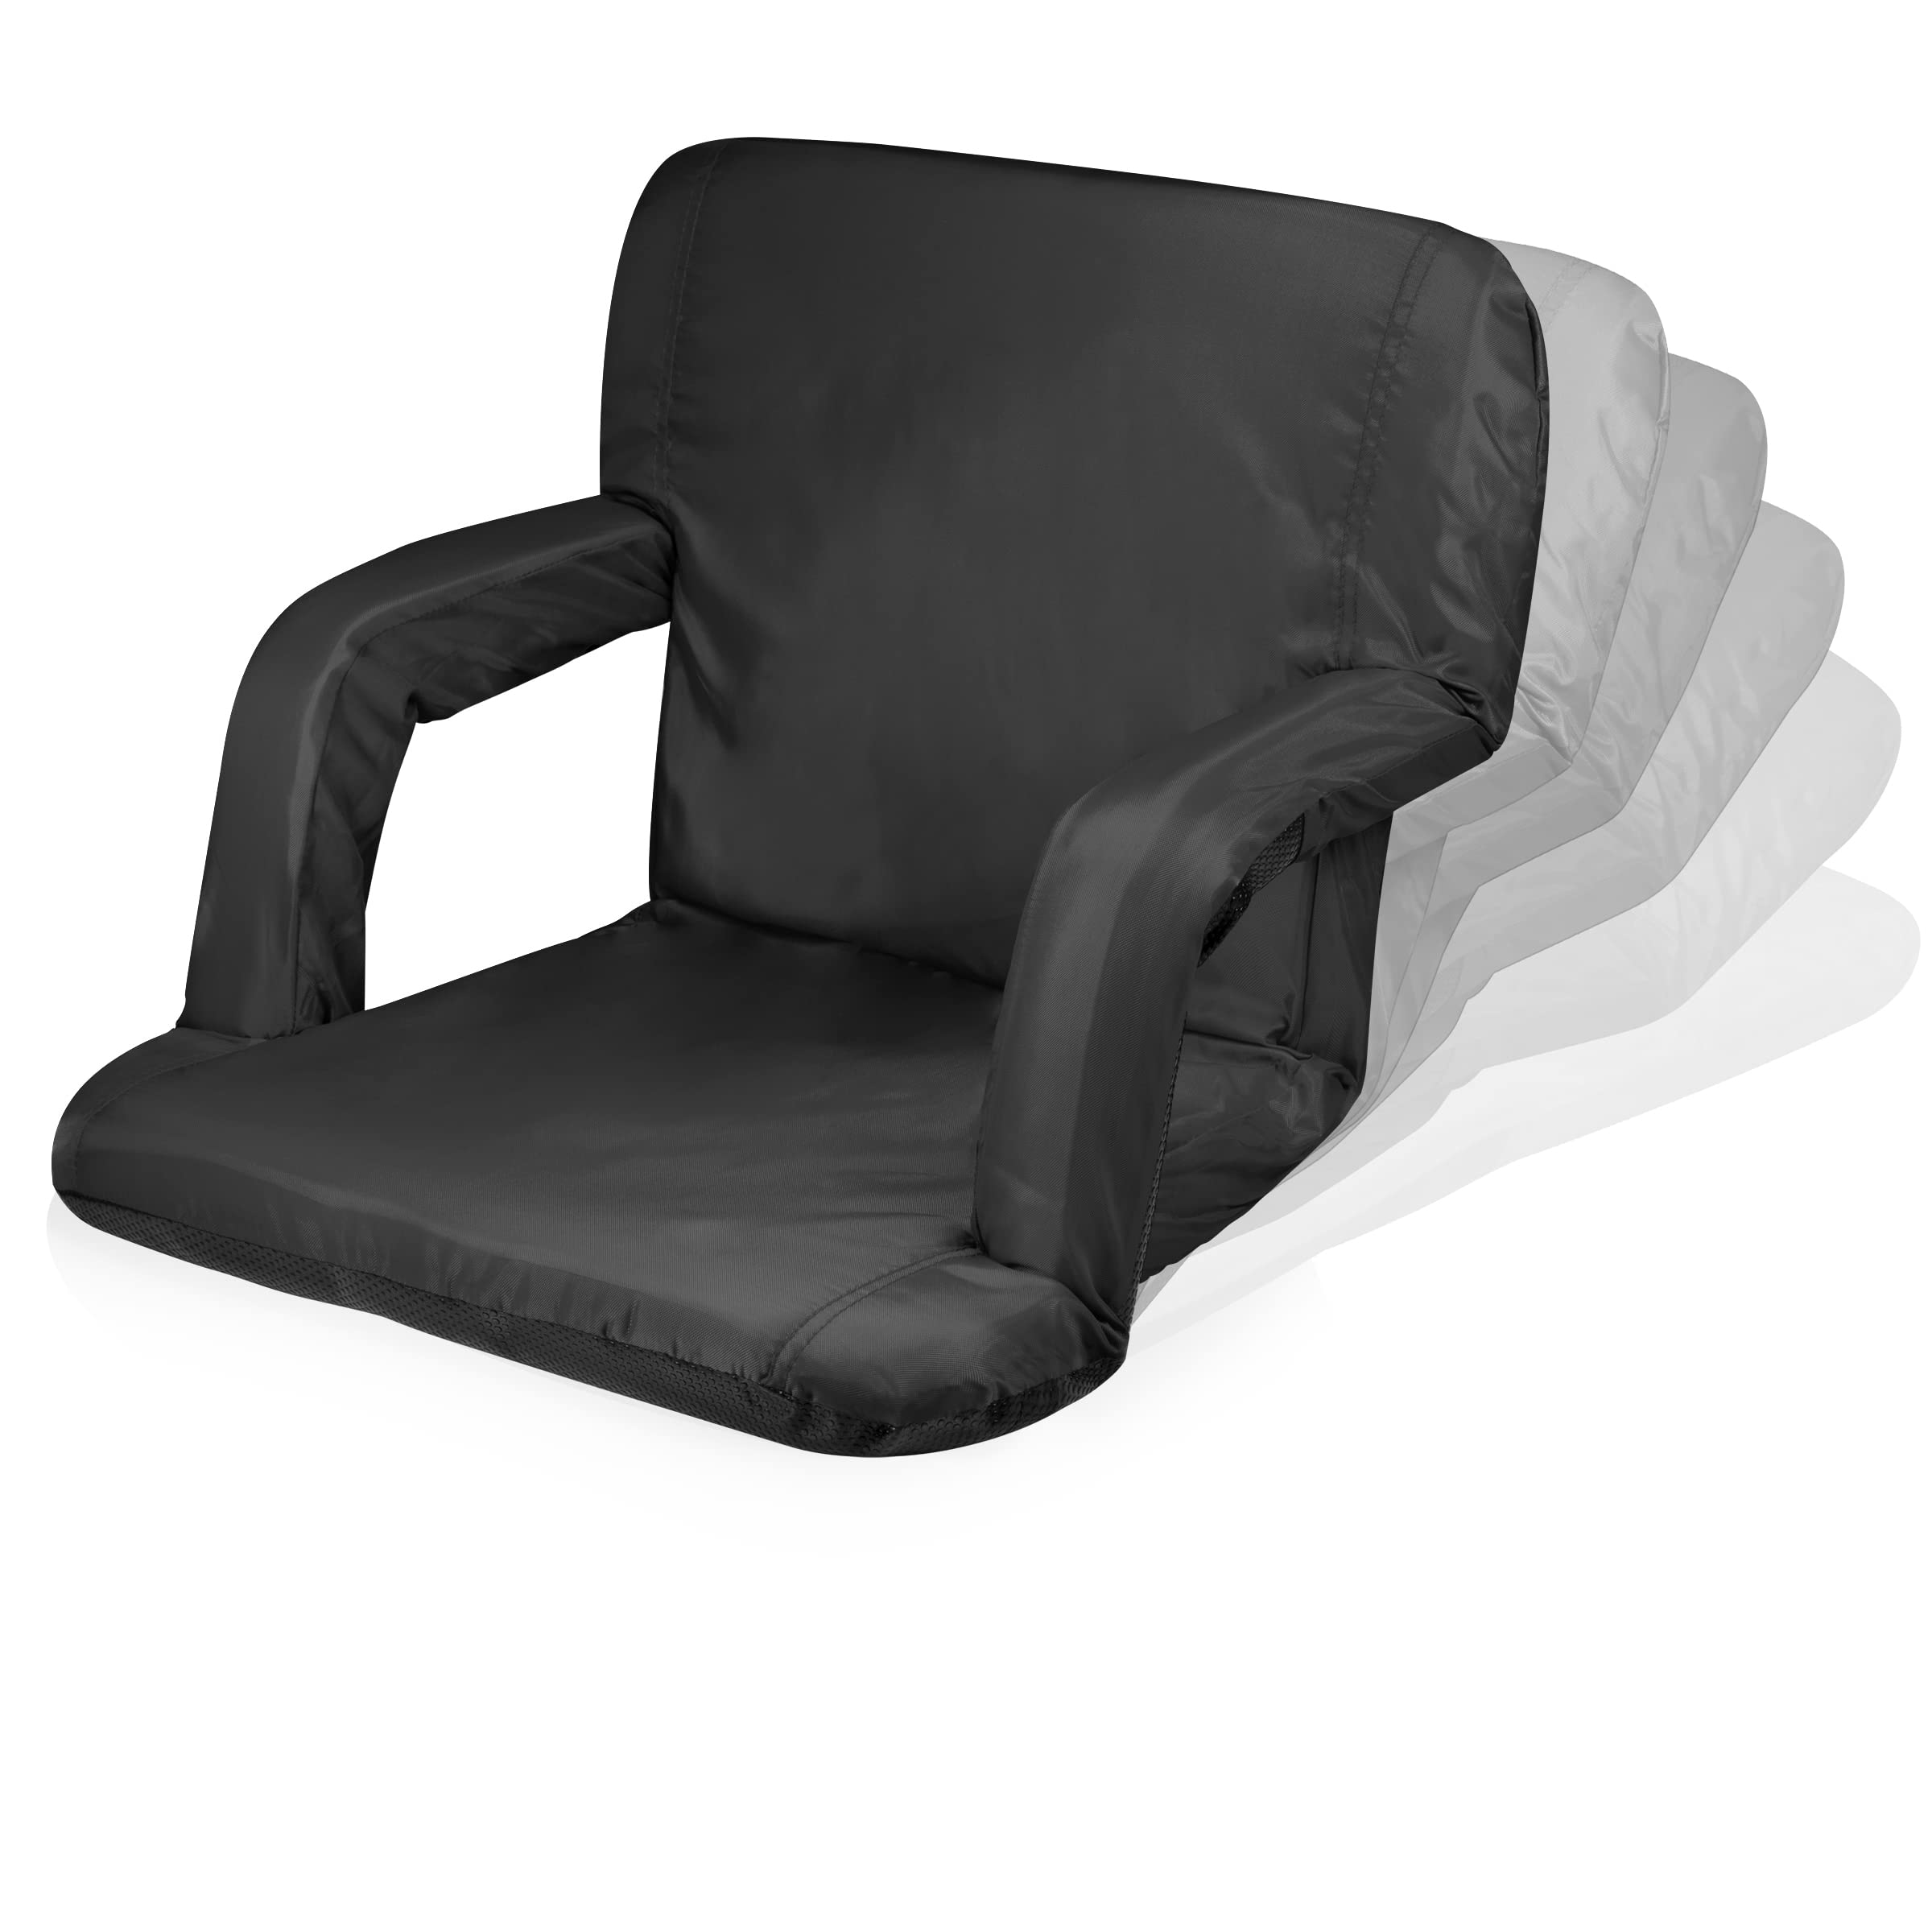 ONIVA - a Picnic Time Brand - Ventura Reclining Stadium Seat with Back Support, Bleacher Seat